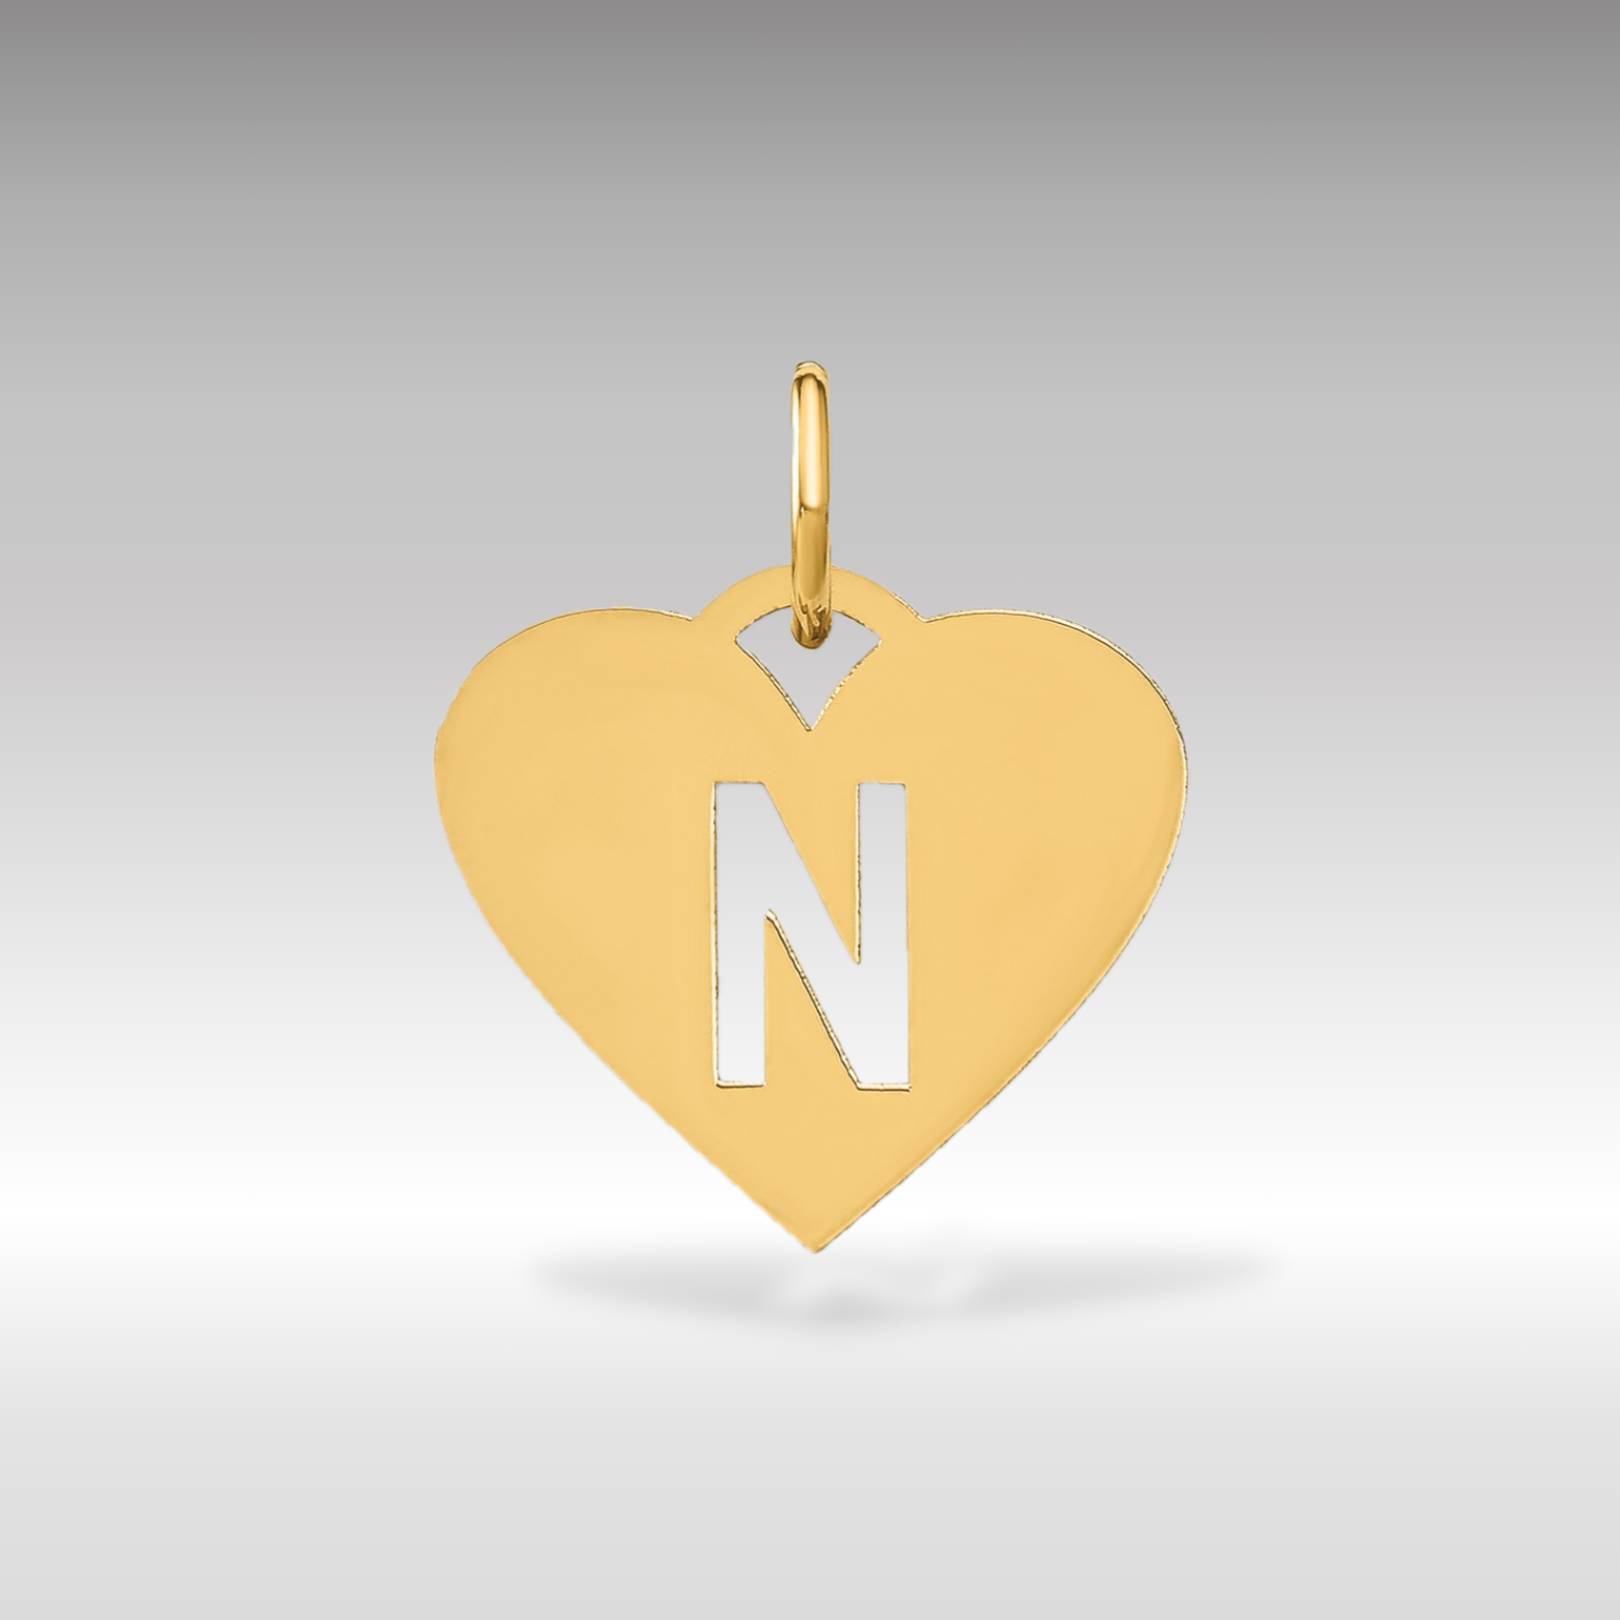 14K Gold Heart Pendant with Letter 'N' - Charlie & Co. Jewelry